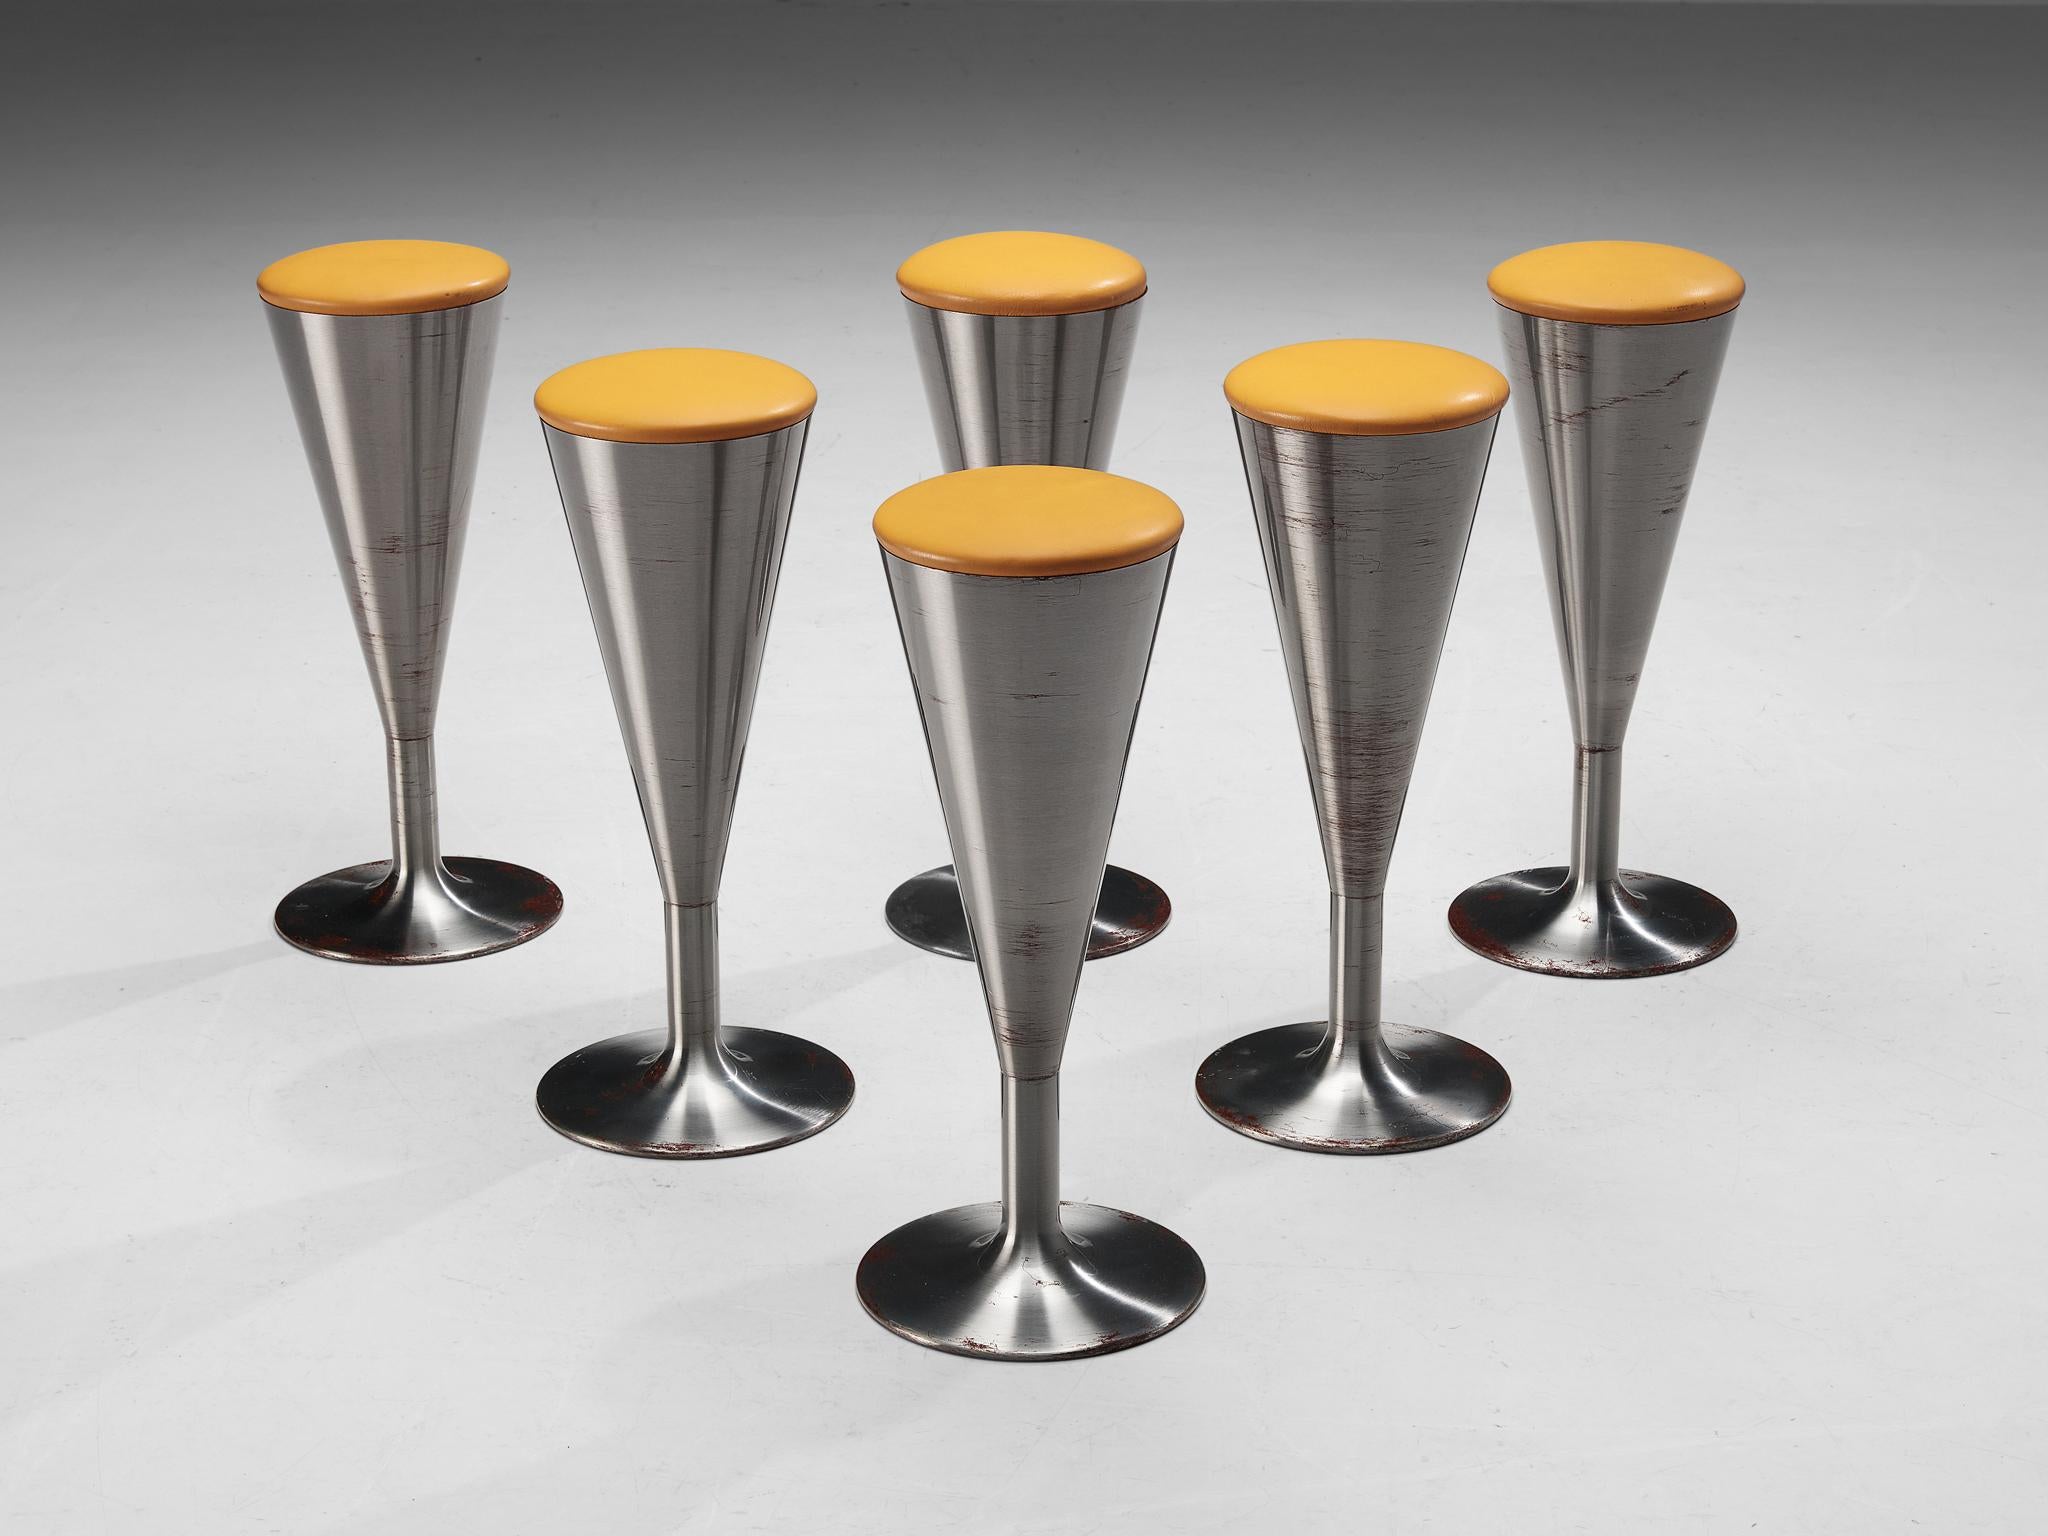 Leo Thafvelin for Johanson design, set of six bar stools, patinated steel, camel leather, Sweden, 1960s 

Set of six eccentric bar stools designed by the Swedish designer Leo Thafvelin. The stools are executed in a thick camel leather for the